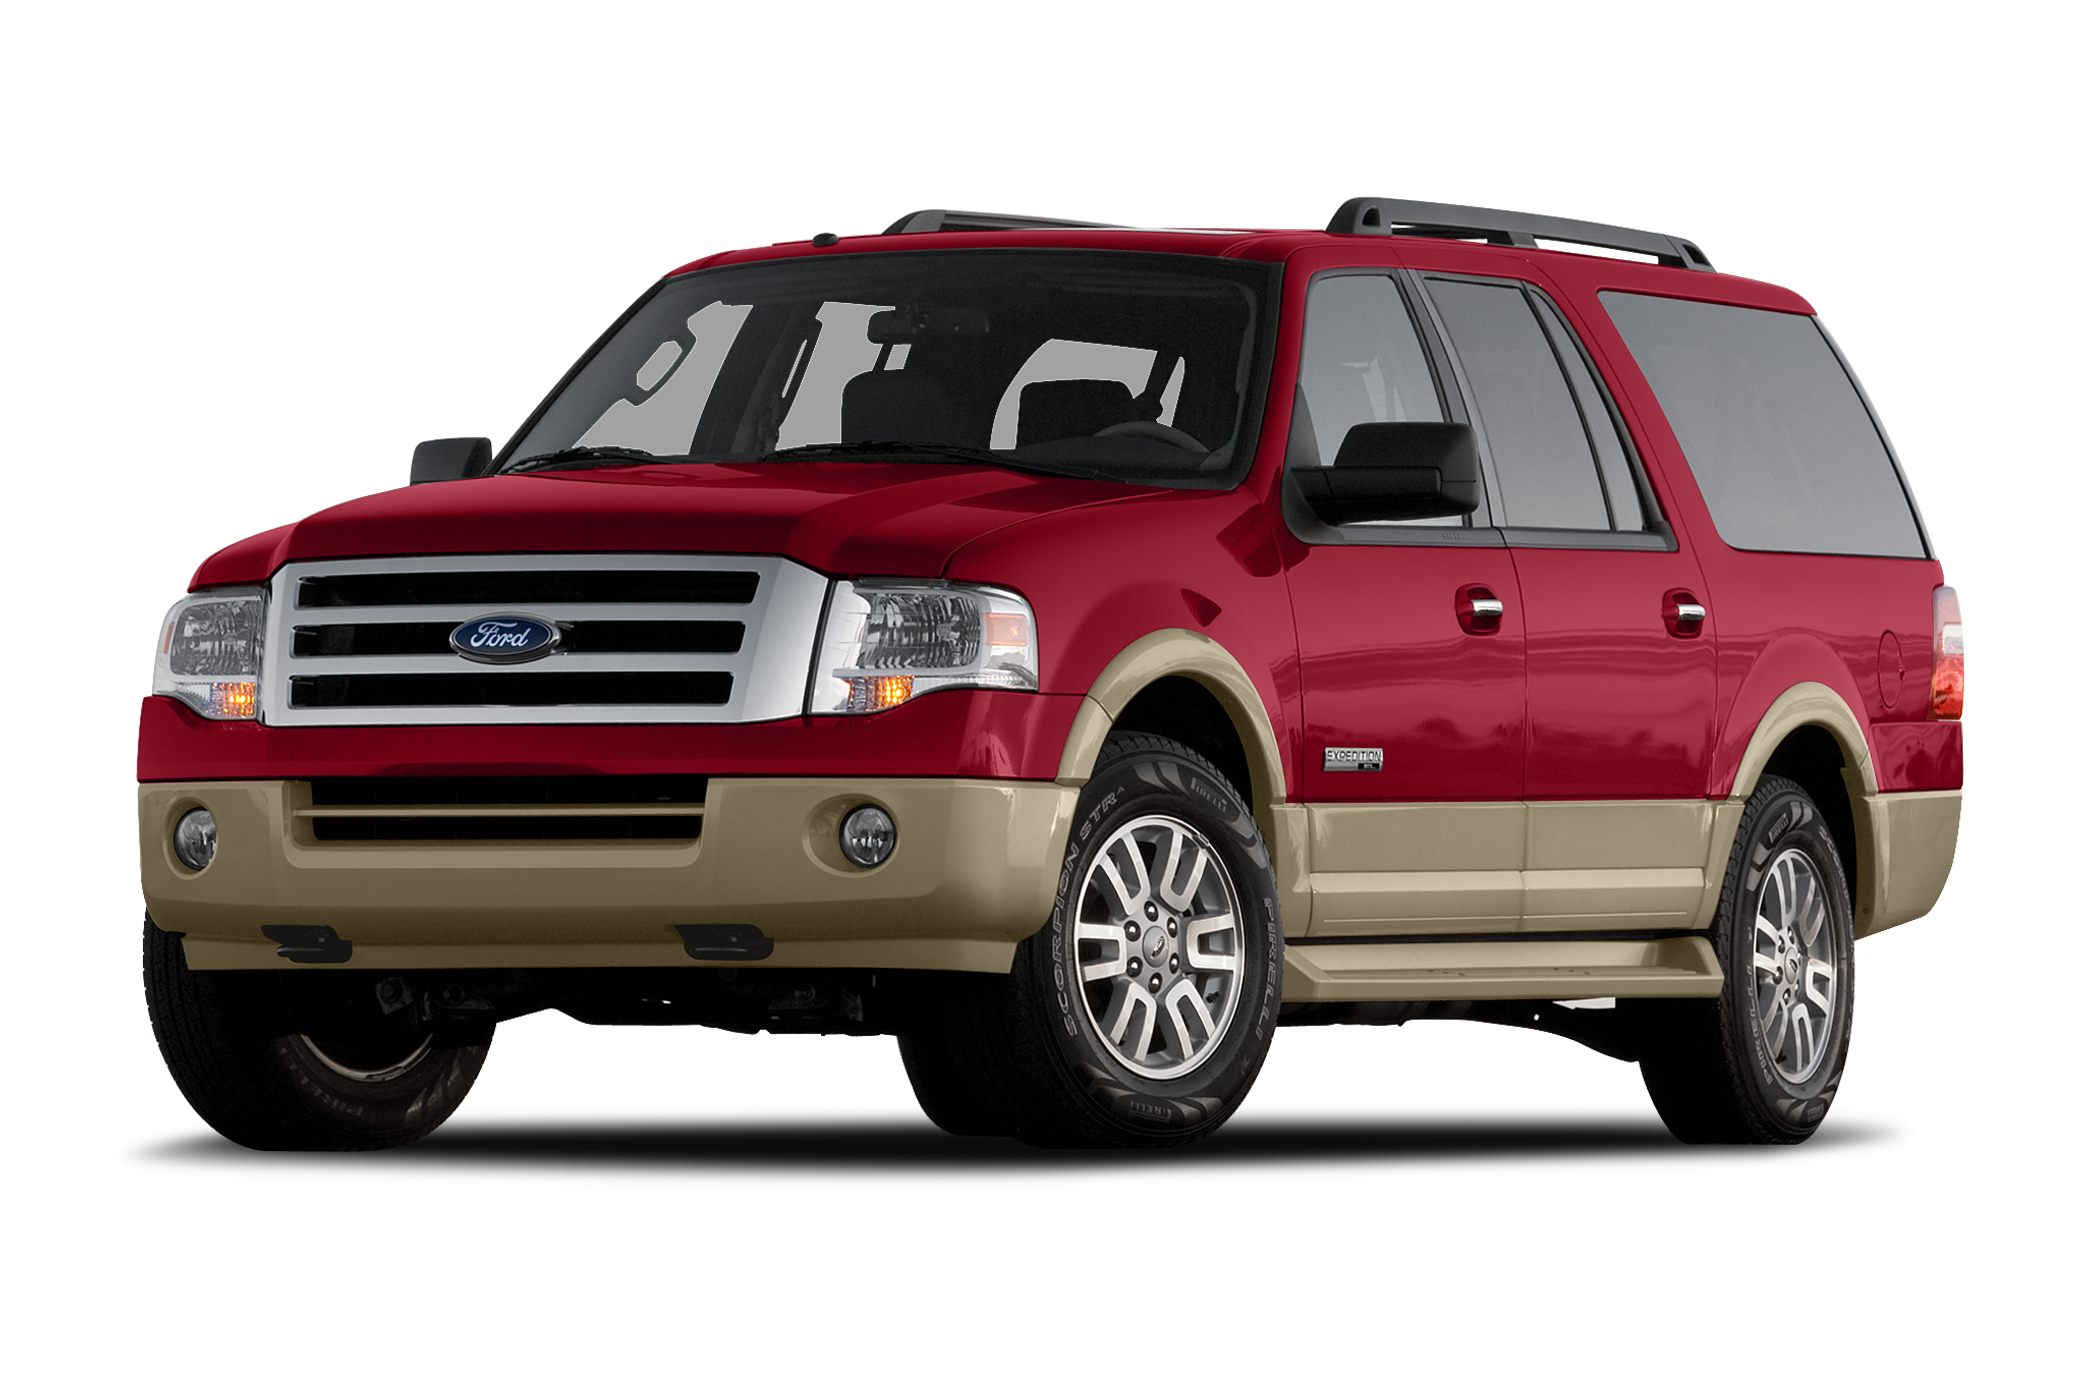 2008 ford expedition limited interior